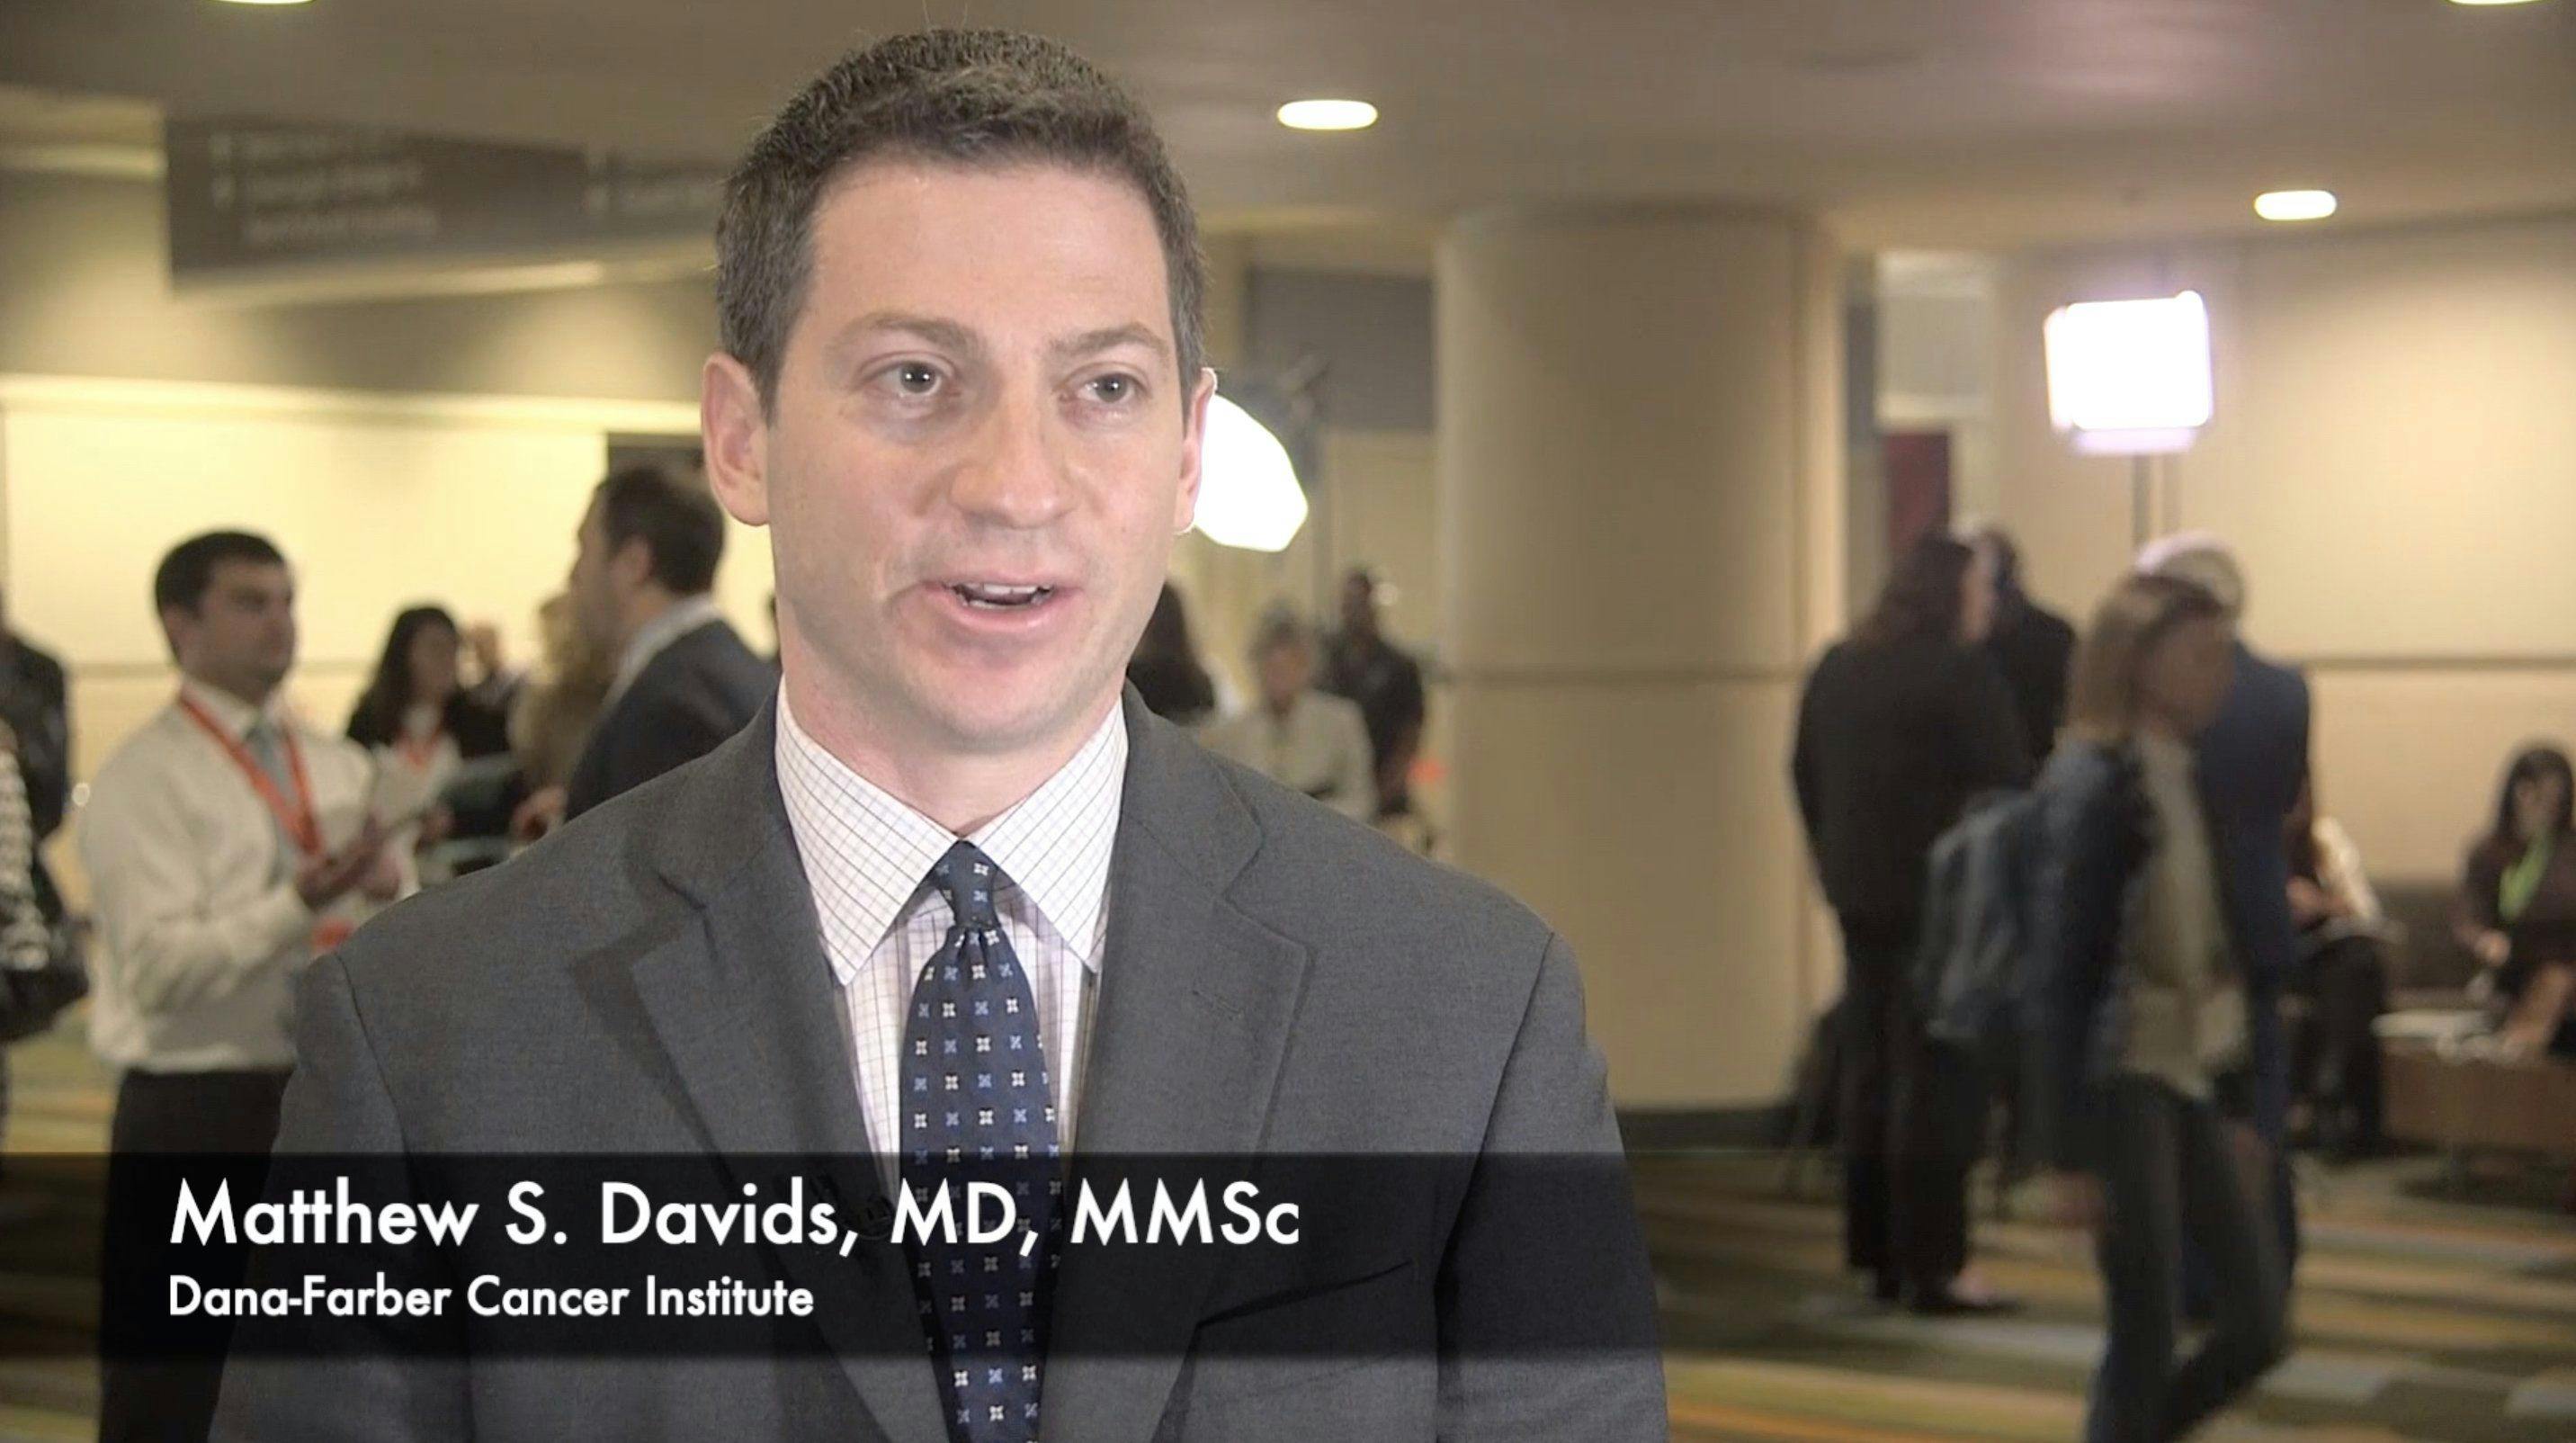 Matthew S. Davids, MD, MMSc, Discusses Study of Duvalisib in Combination with Venetoclax